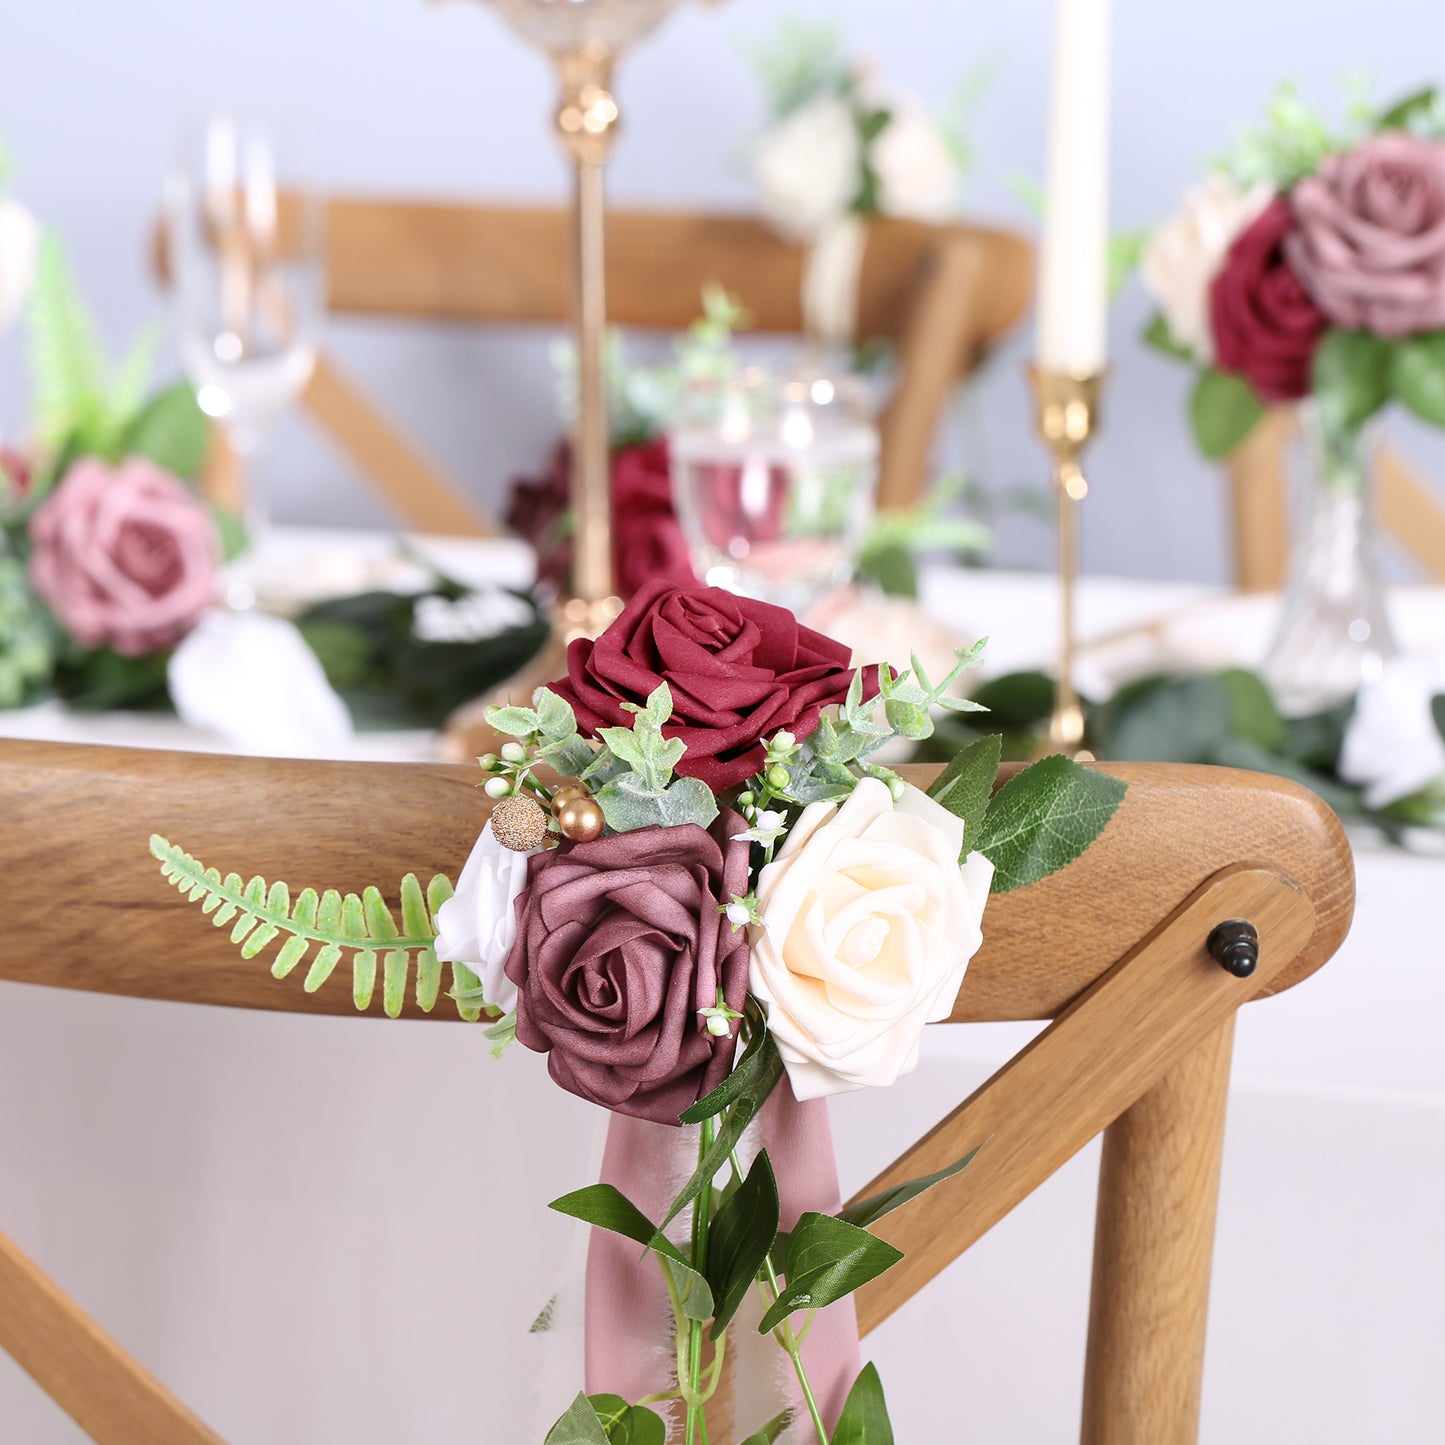 Wedding Aisle & Chair Decor  Burgundy & Dusty Rose Free-Standing Flower  Arrangements for Arch/Aisle Decor (Set of 2) - – Ling's Moment